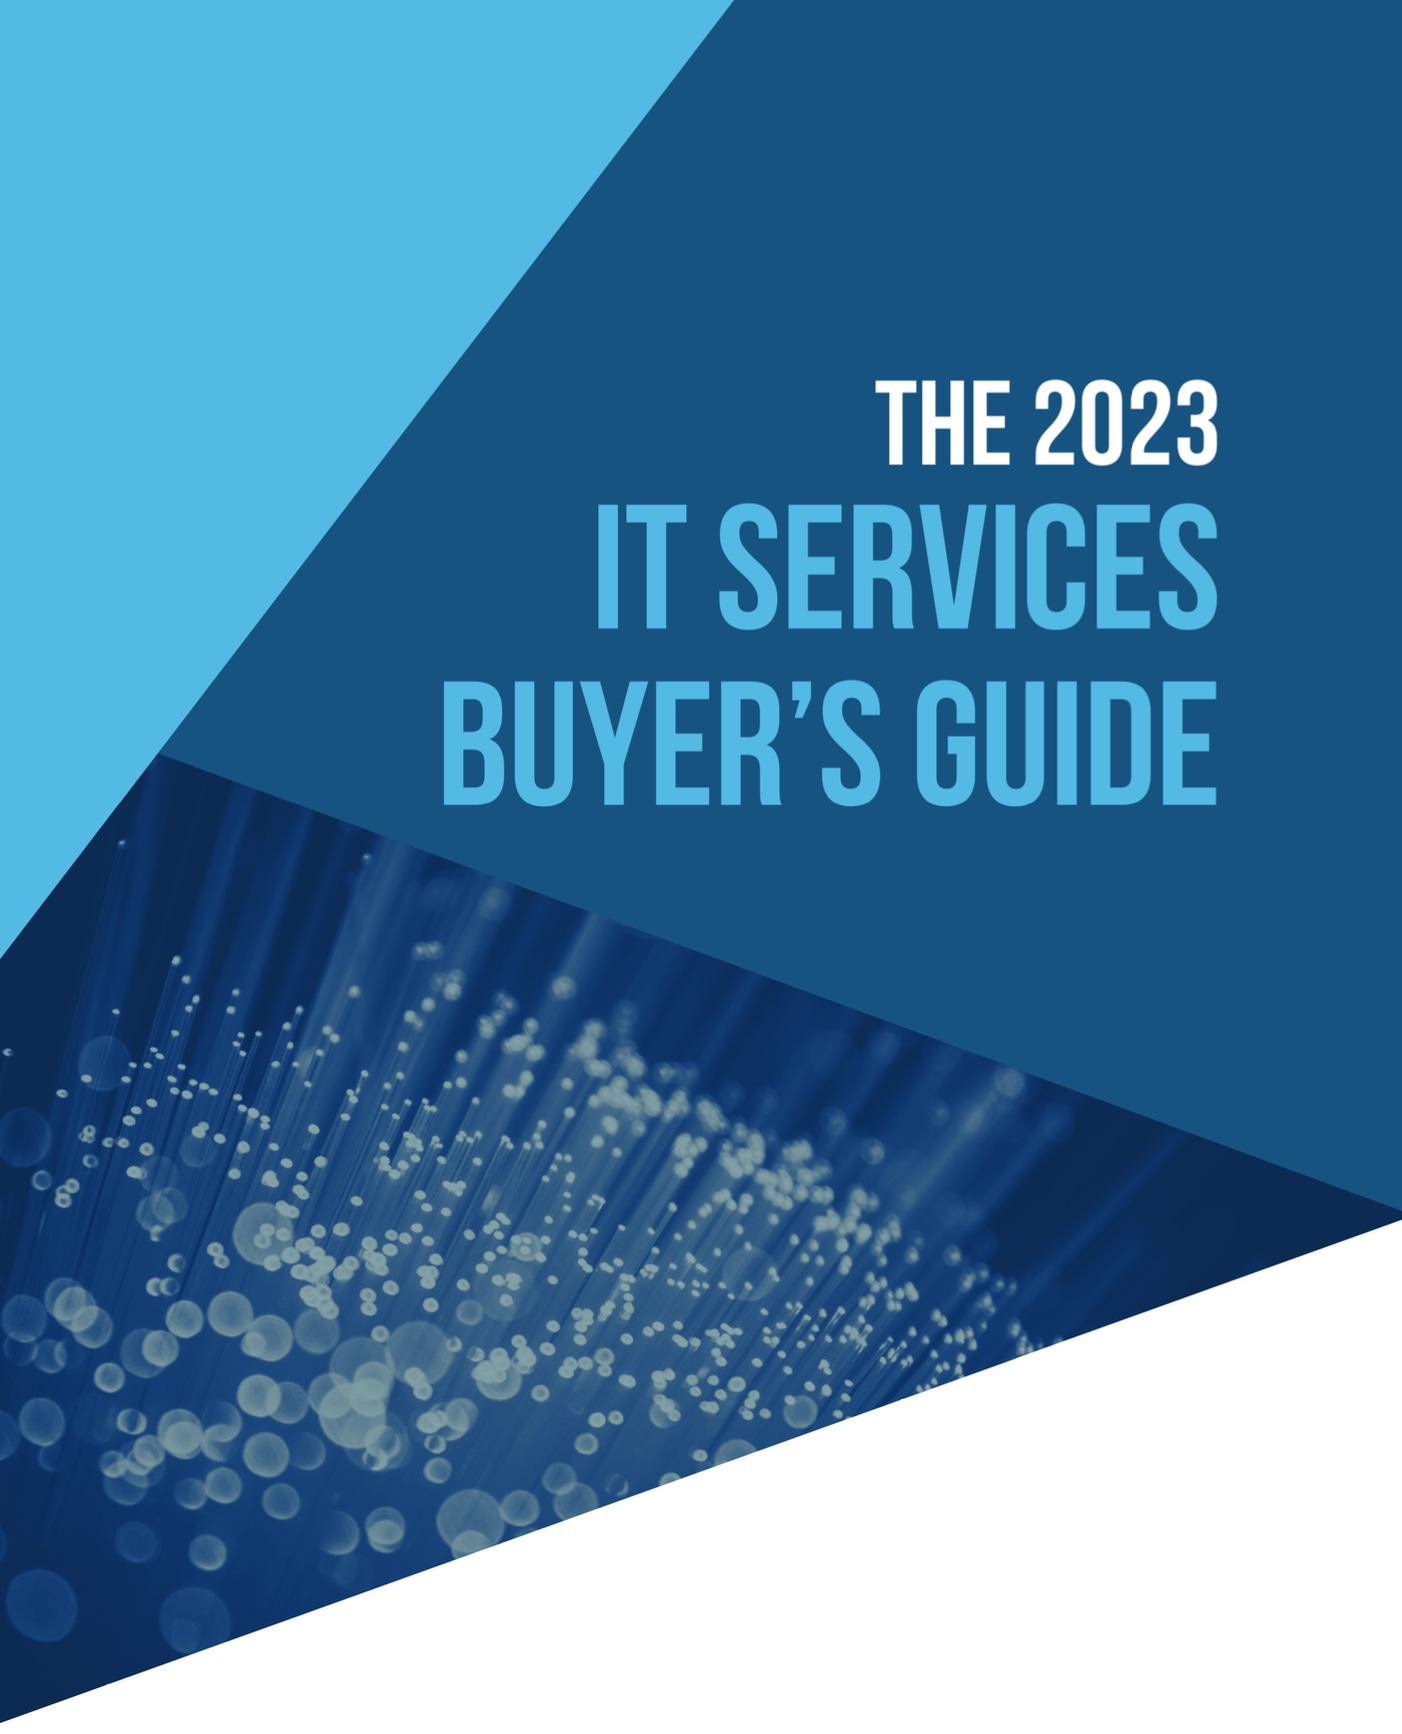 IT buyers guide cover